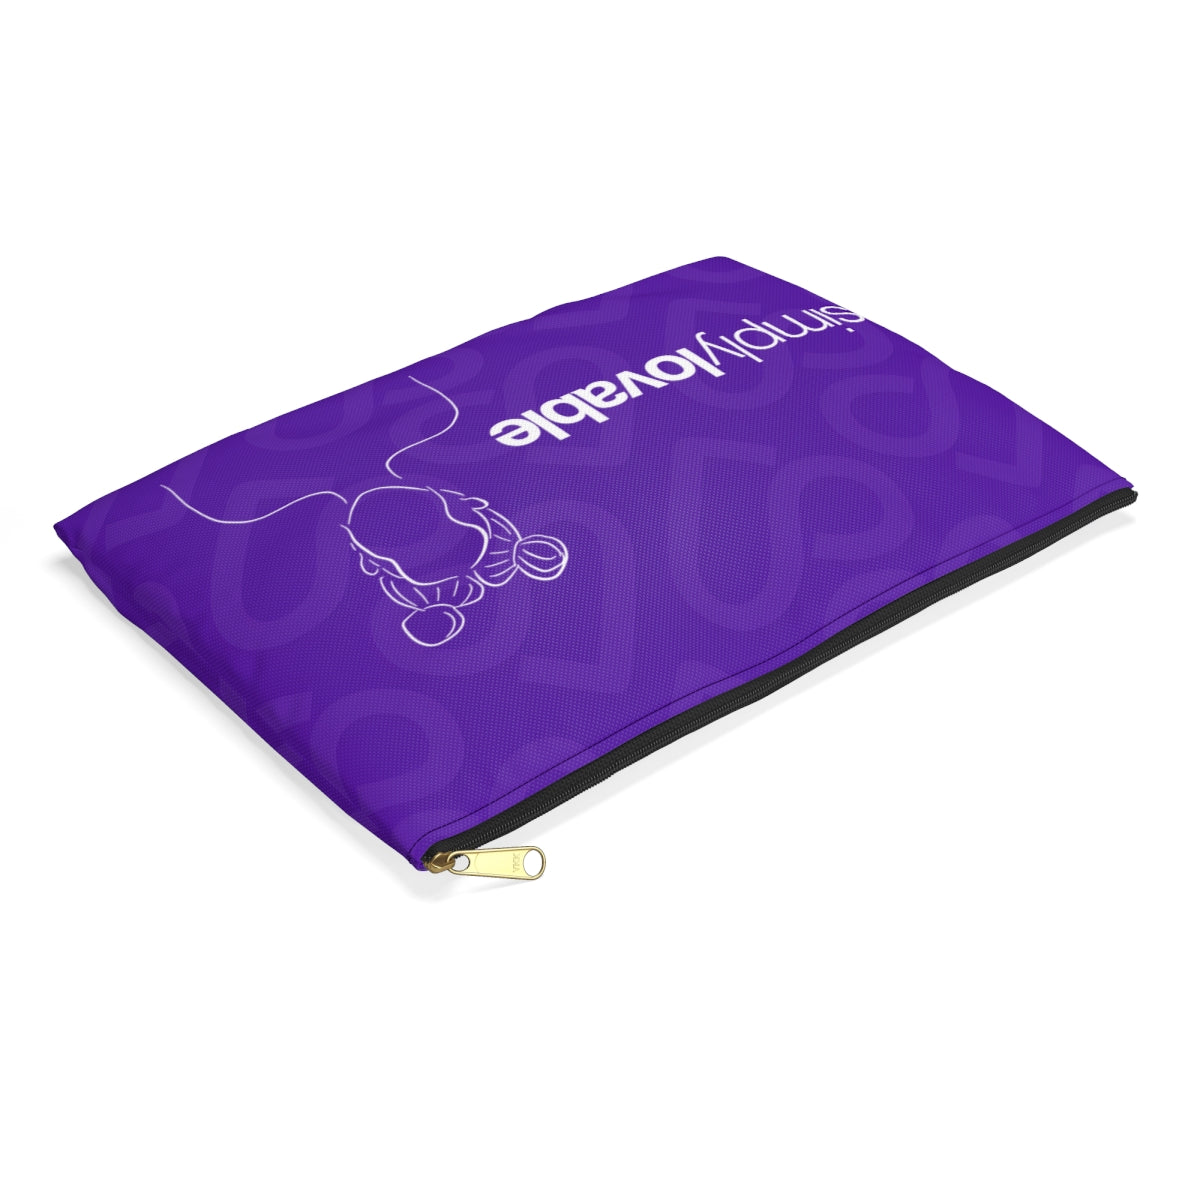 Simply Lovable Accessory Pouch (Purple)